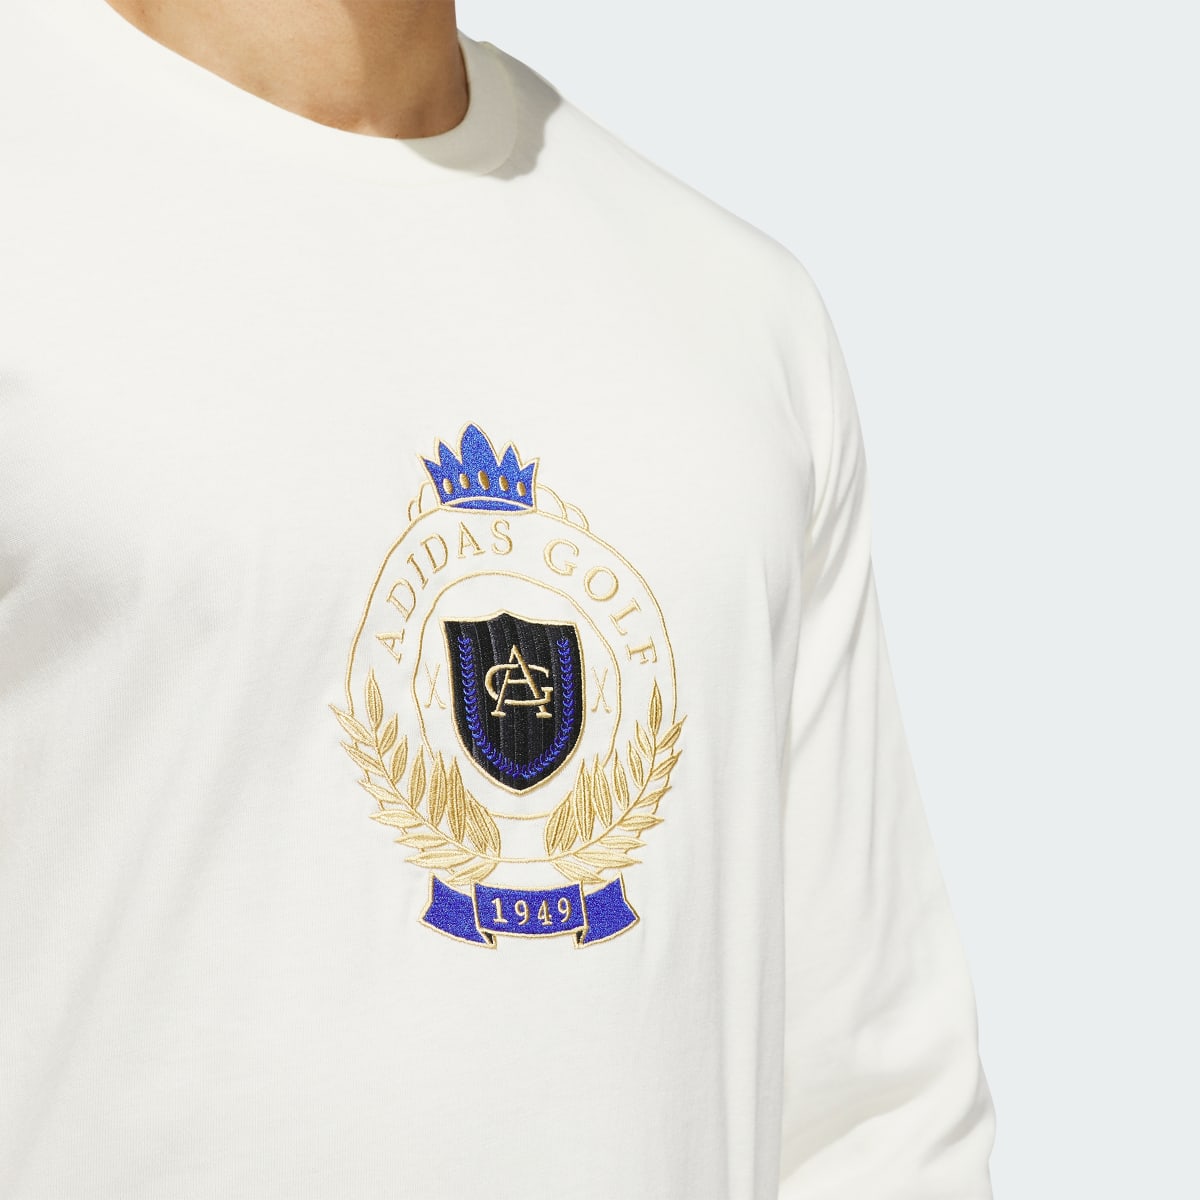 Adidas Go-To Crest Graphic Long Sleeve T-Shirt. 6